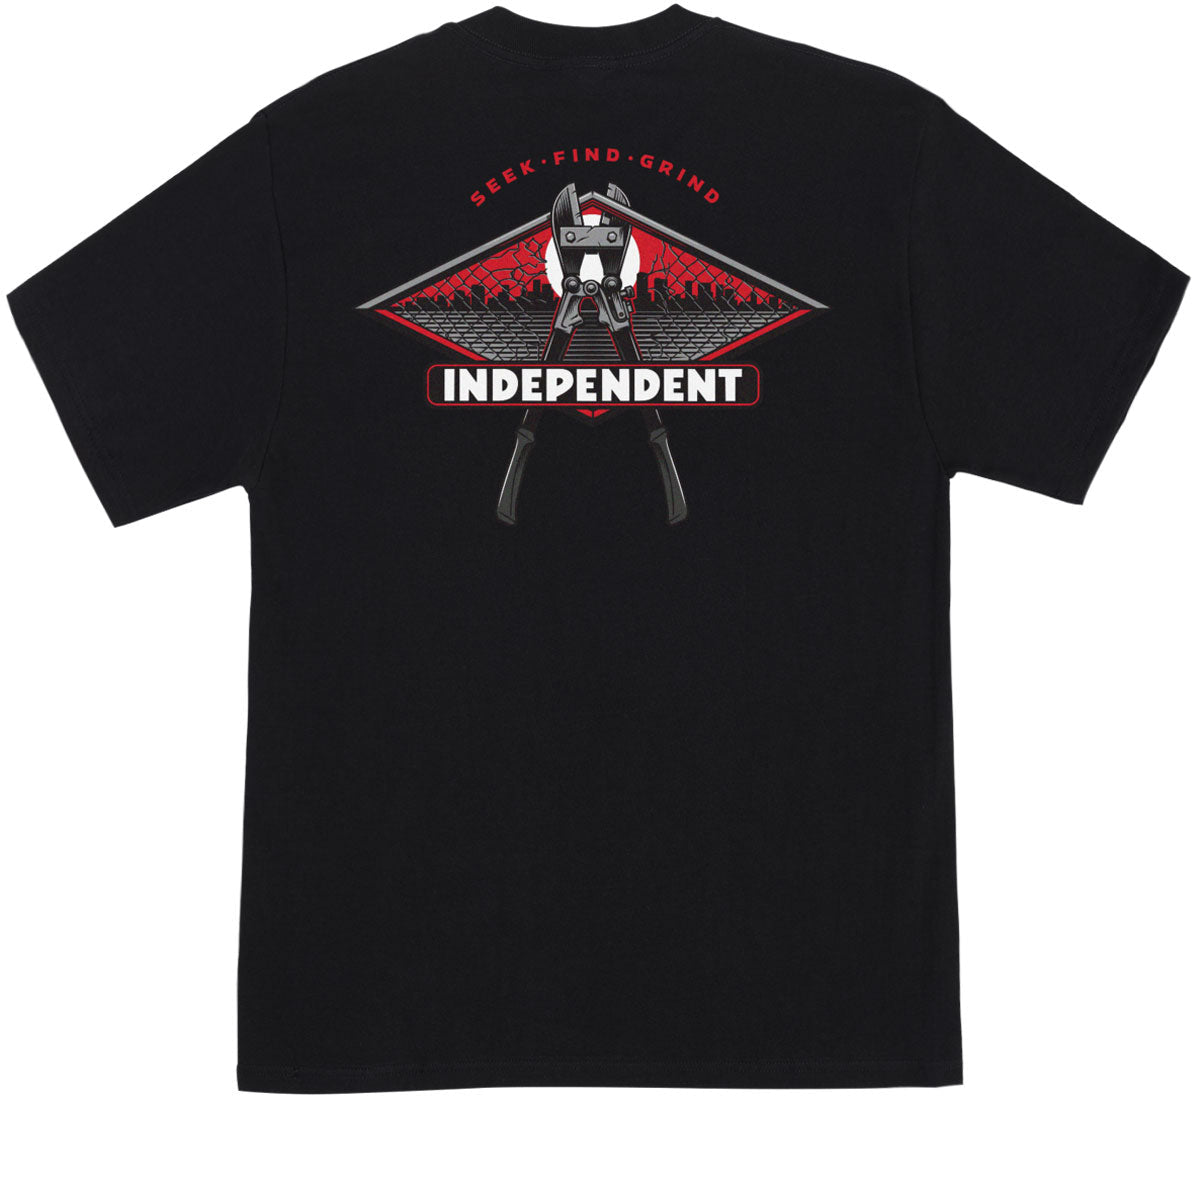 Independent Keys to the City T-Shirt - Black image 1